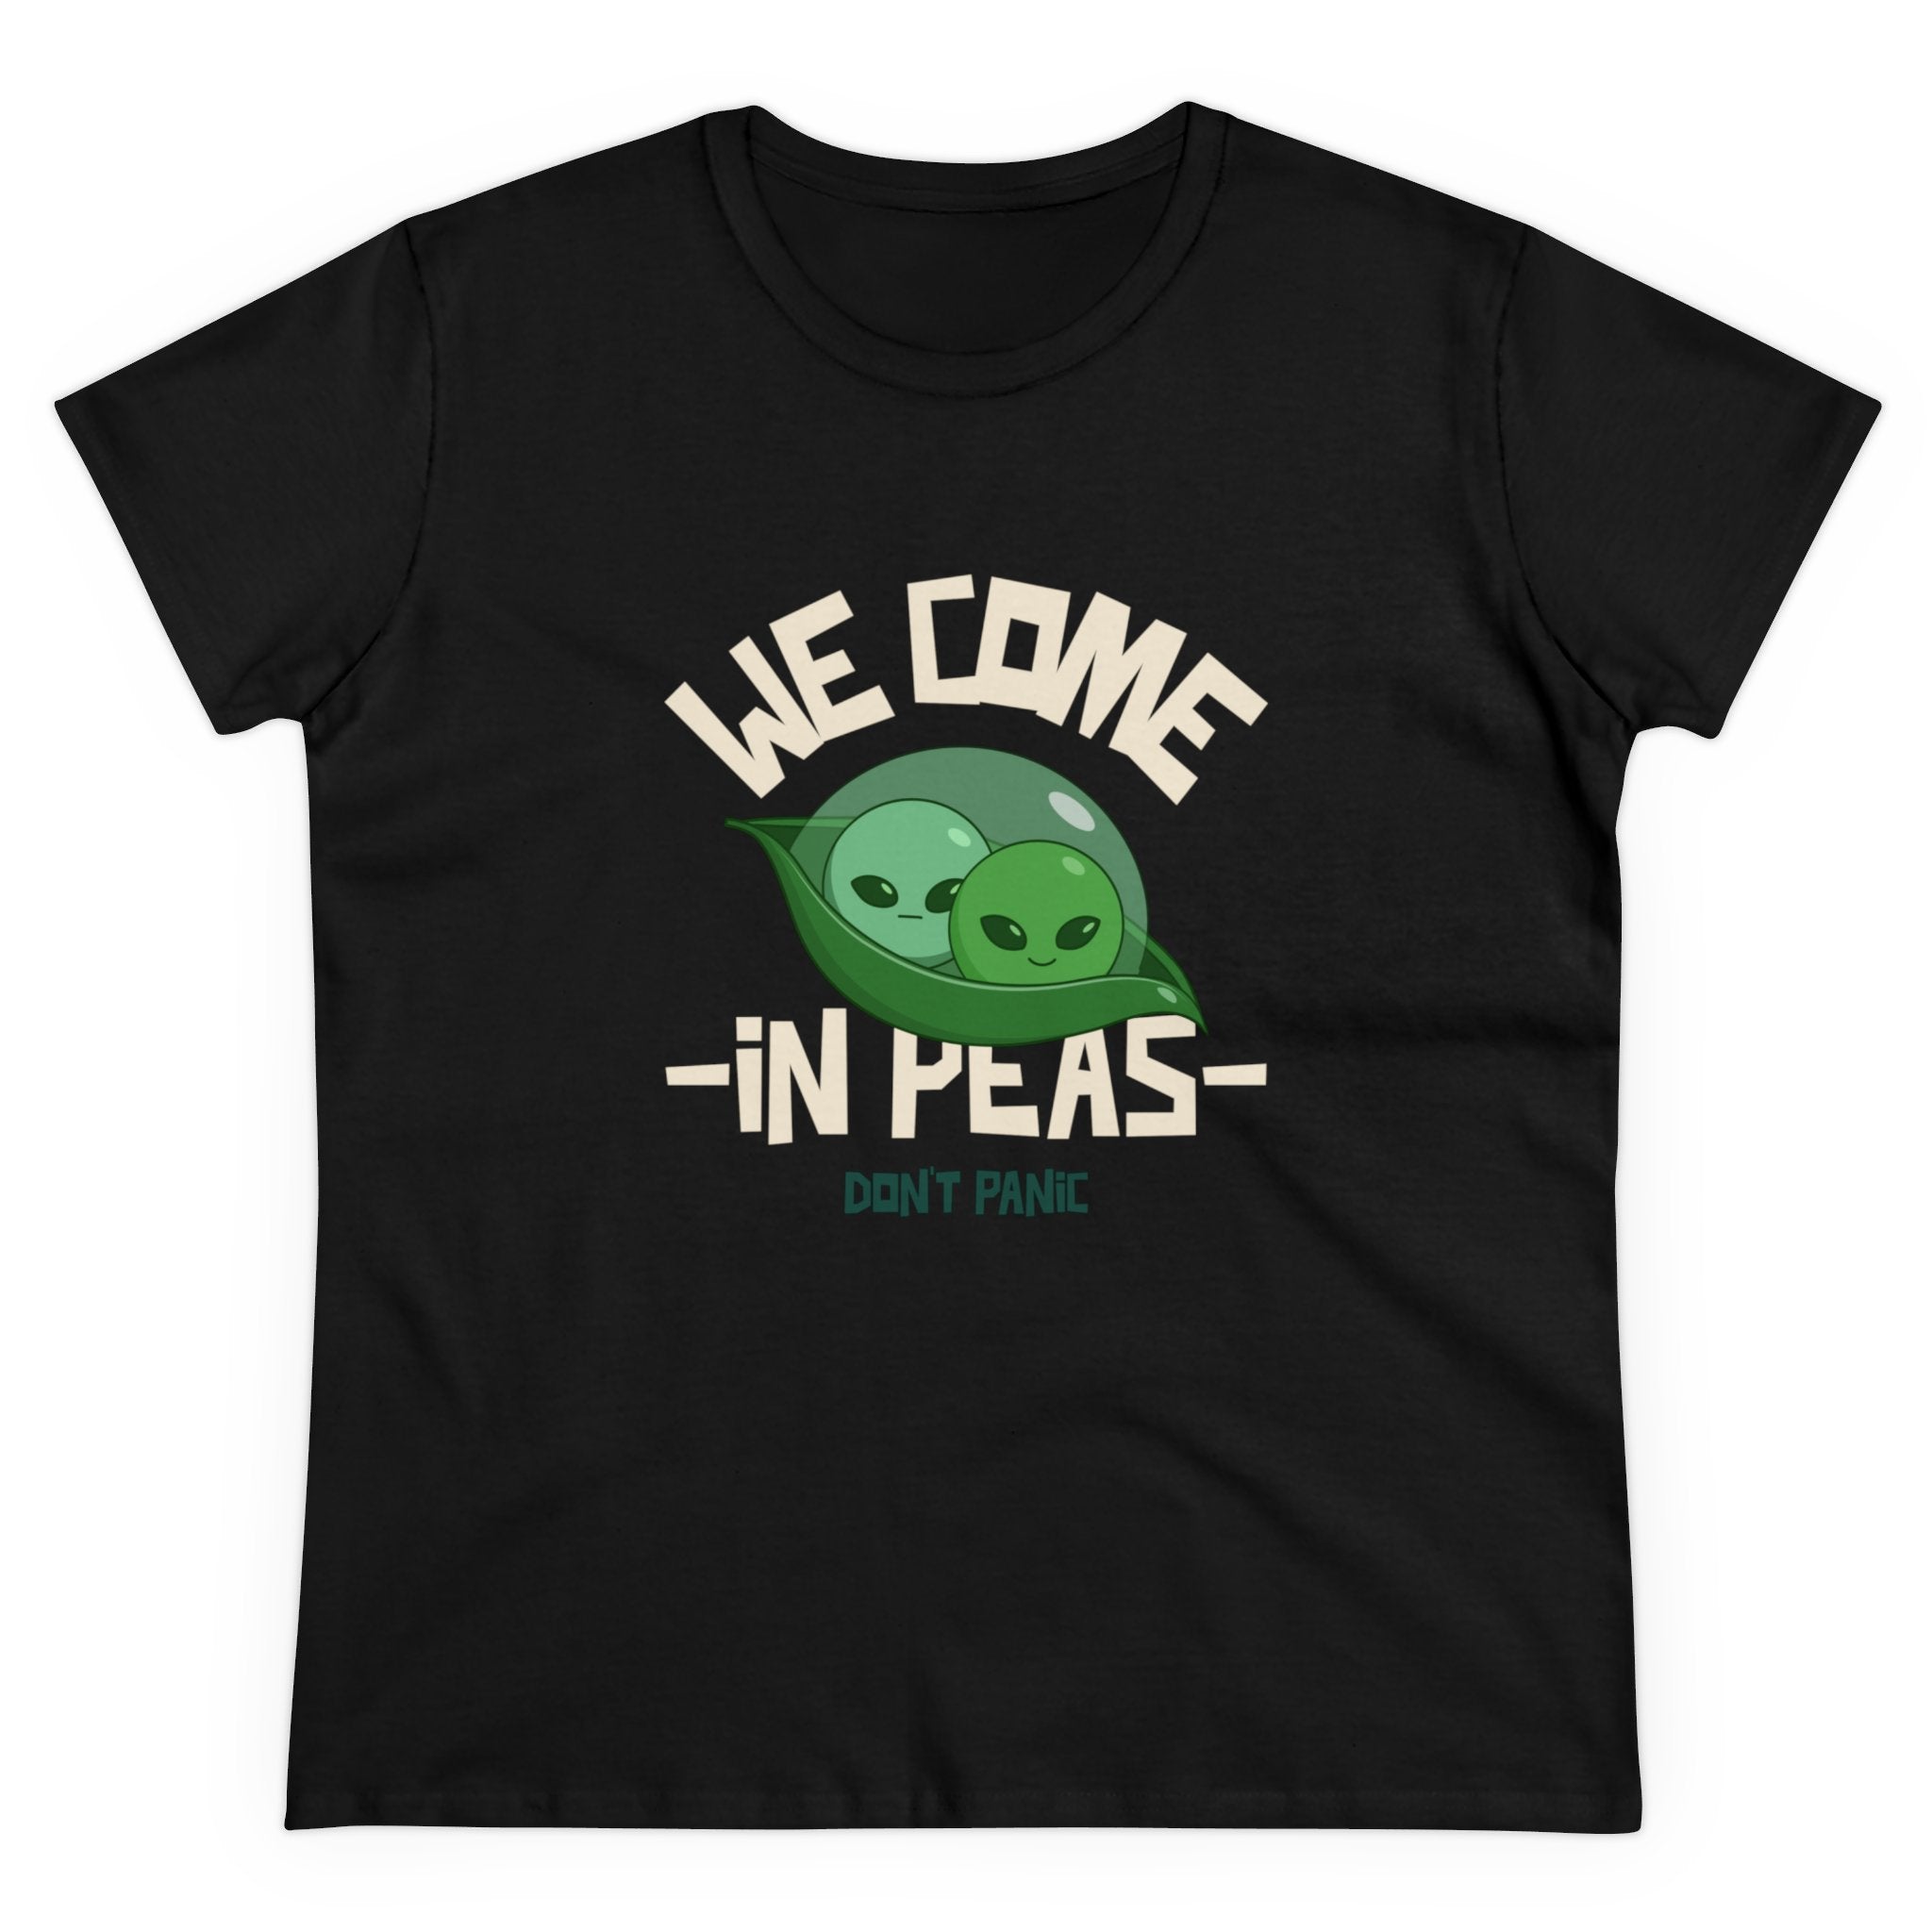 We Come in Pees - Women's Tee